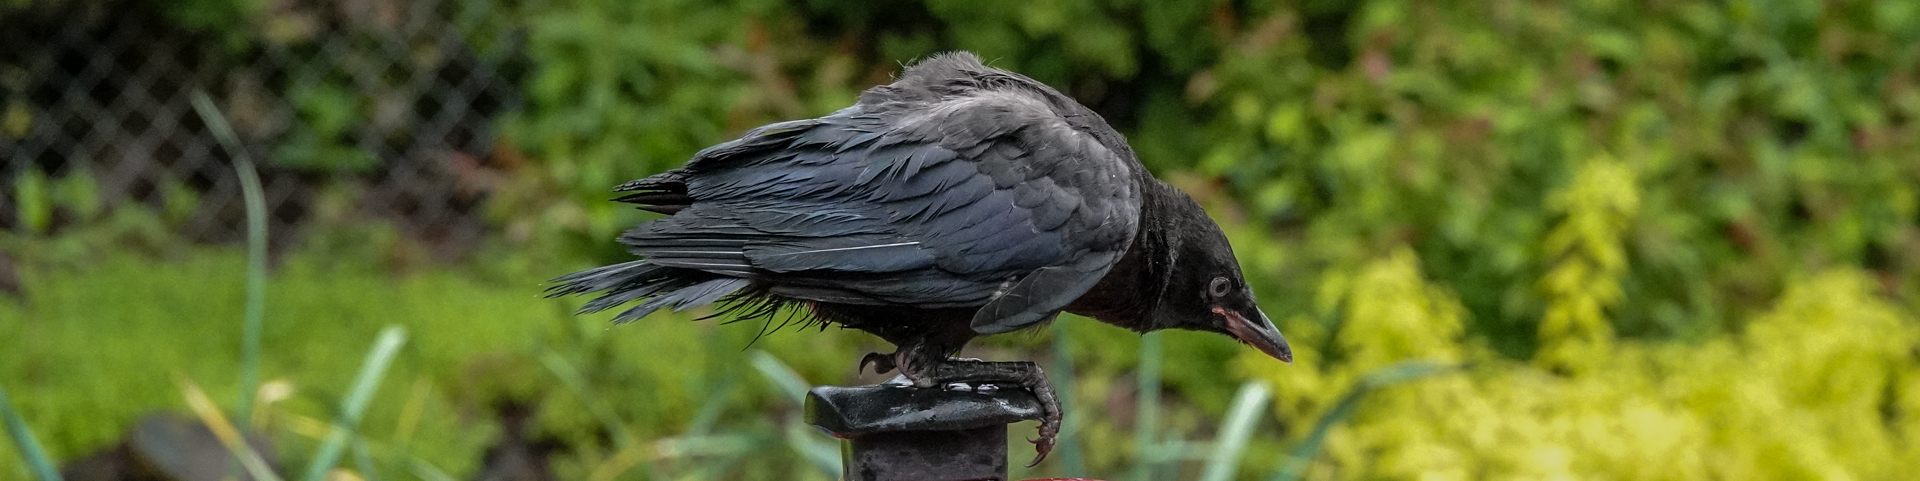 From the Archive: Backyard Fledgling Crow, 6/4/22